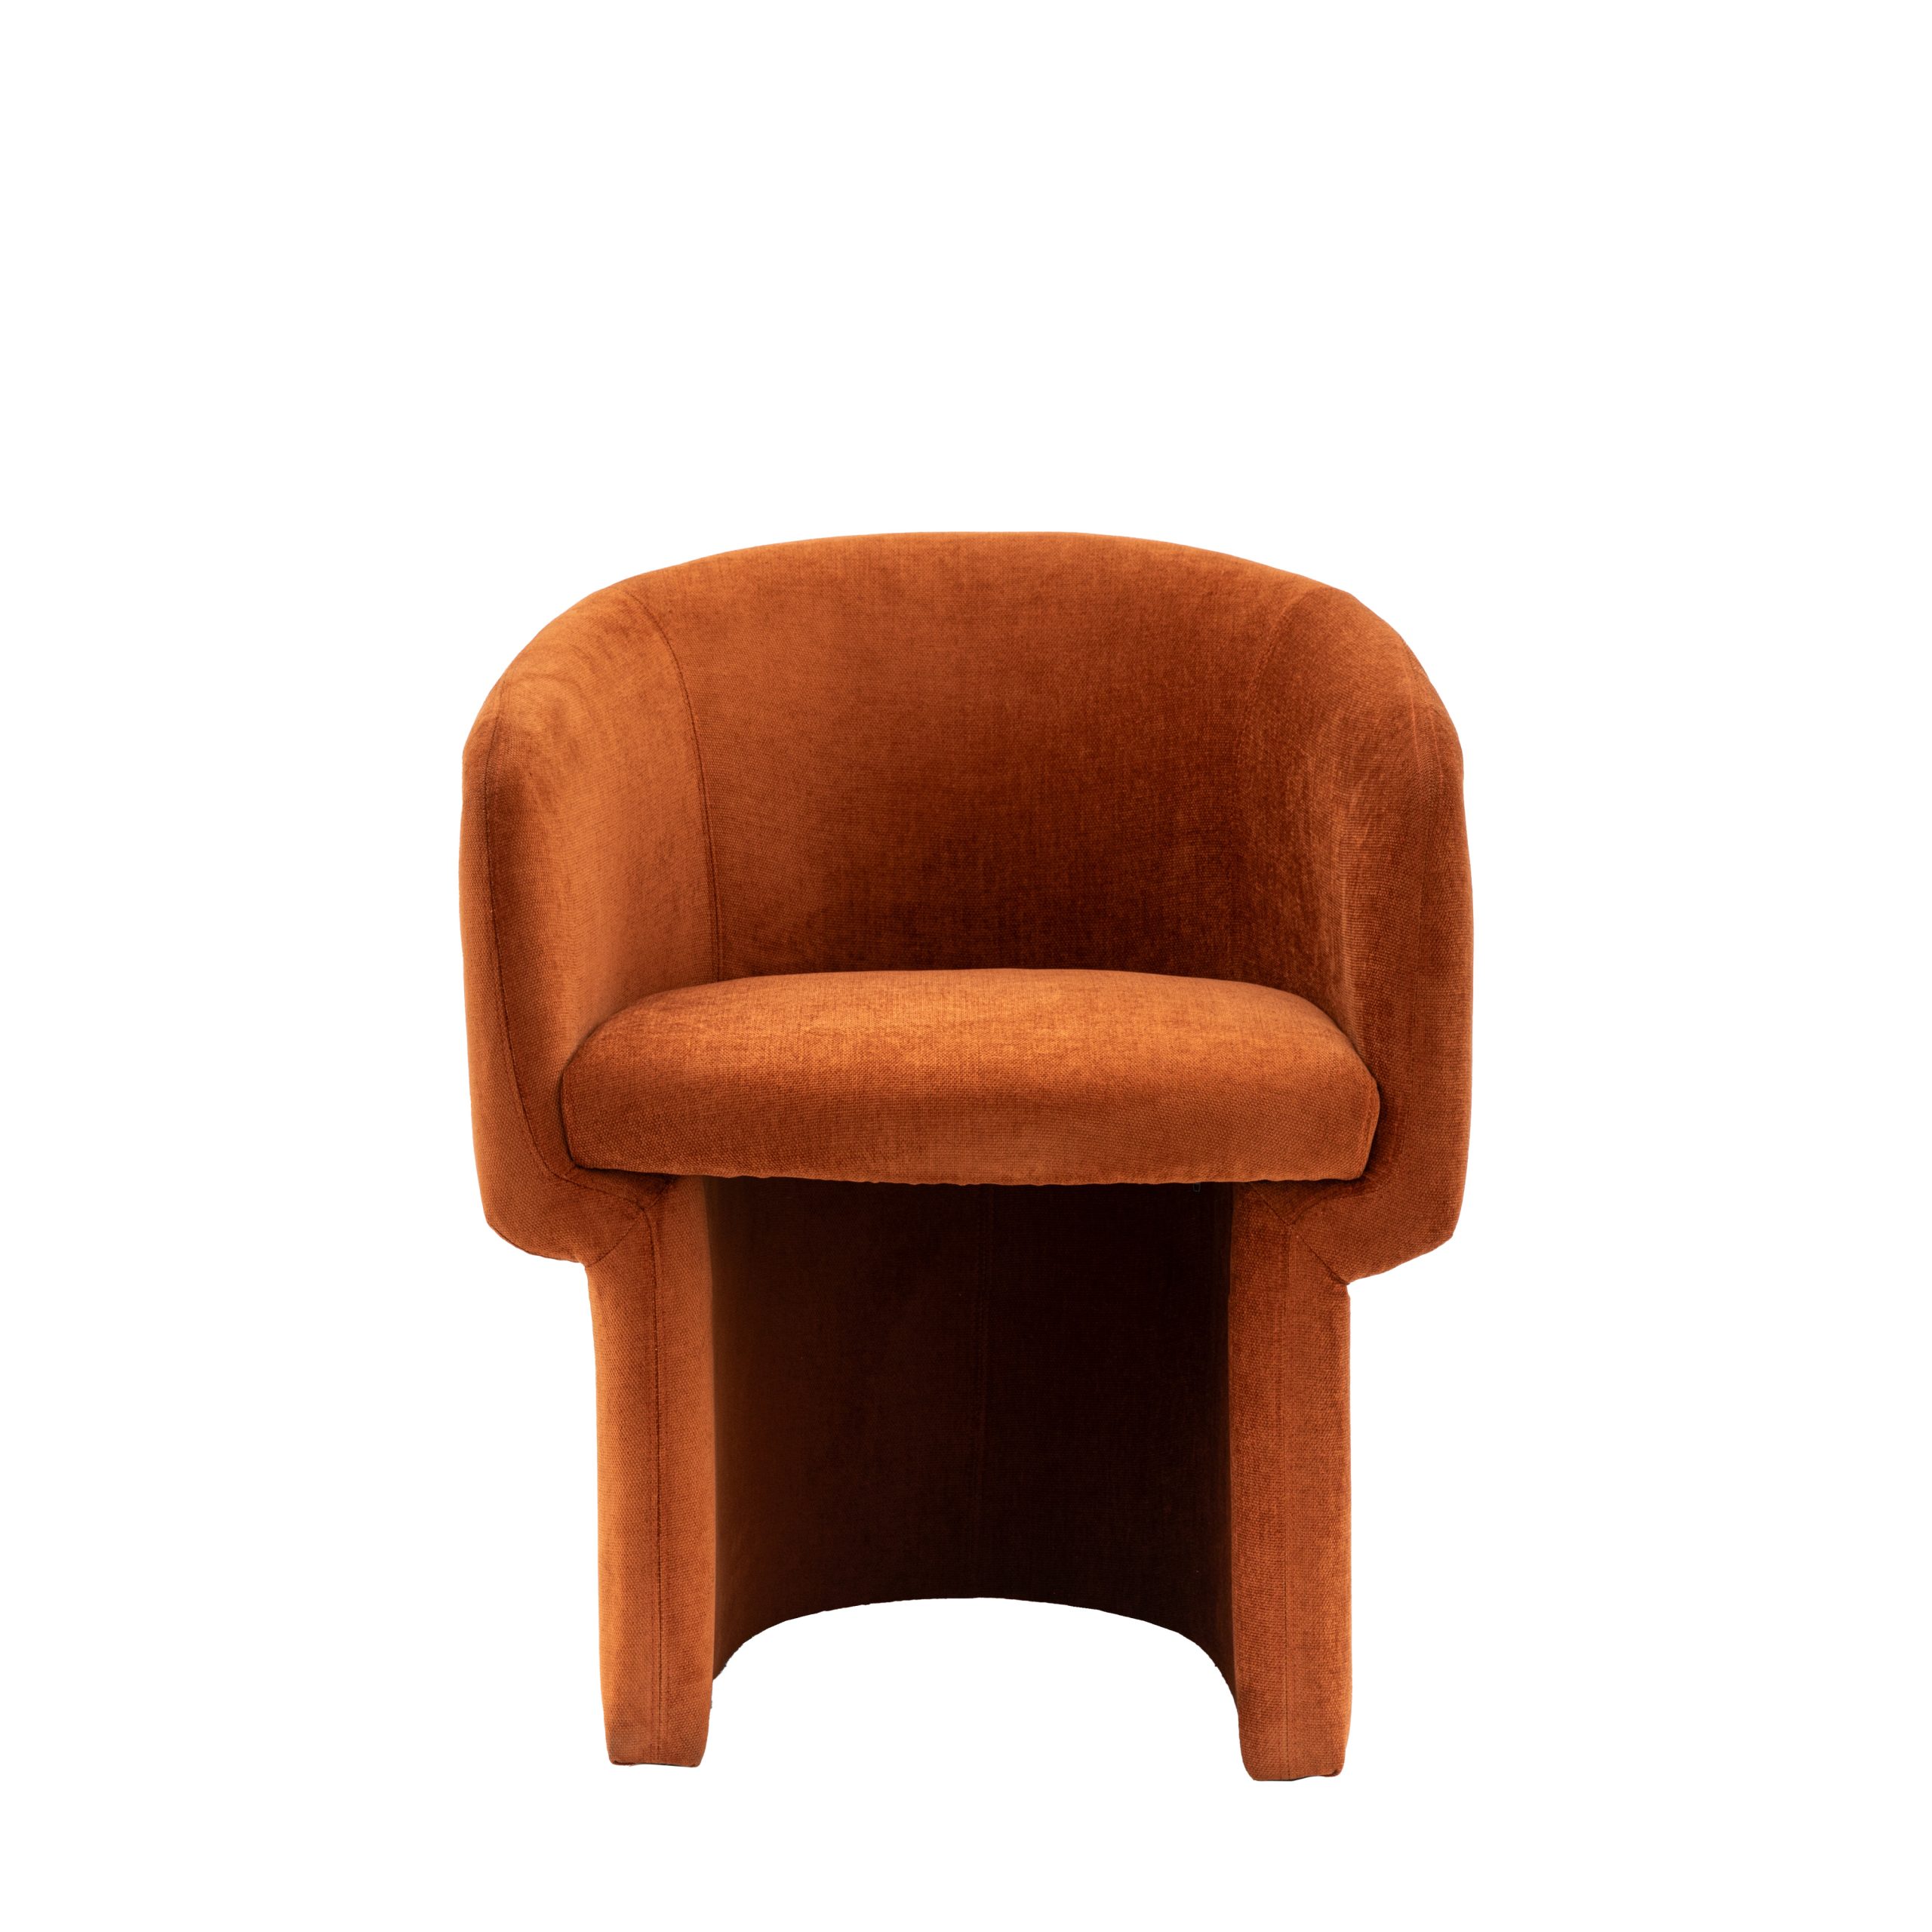 Gallery Direct Holm Dining Chair Rust